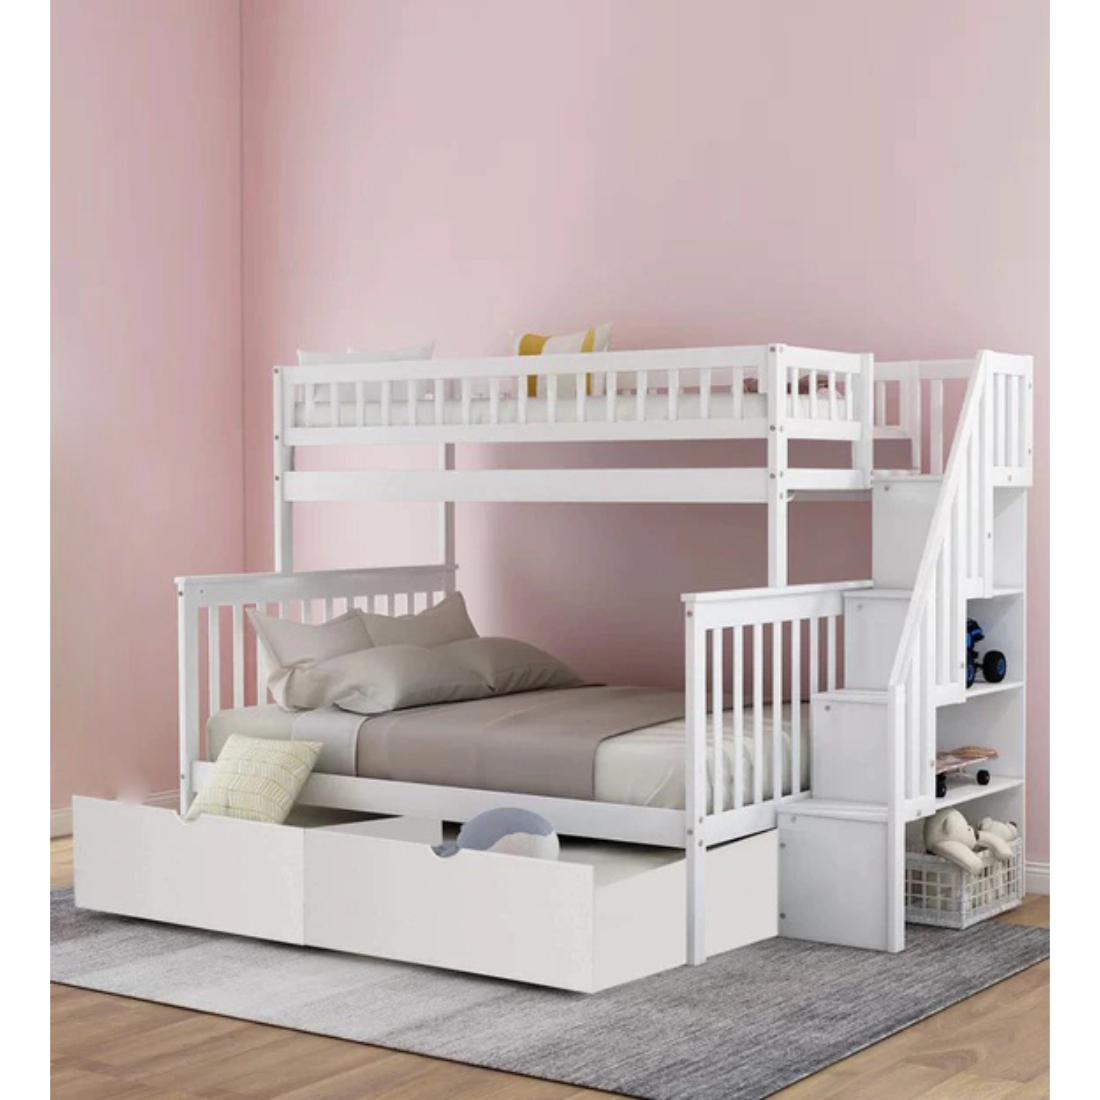 Advik Solid Wood Bunk Bed With, White Bunk Beds With Storage